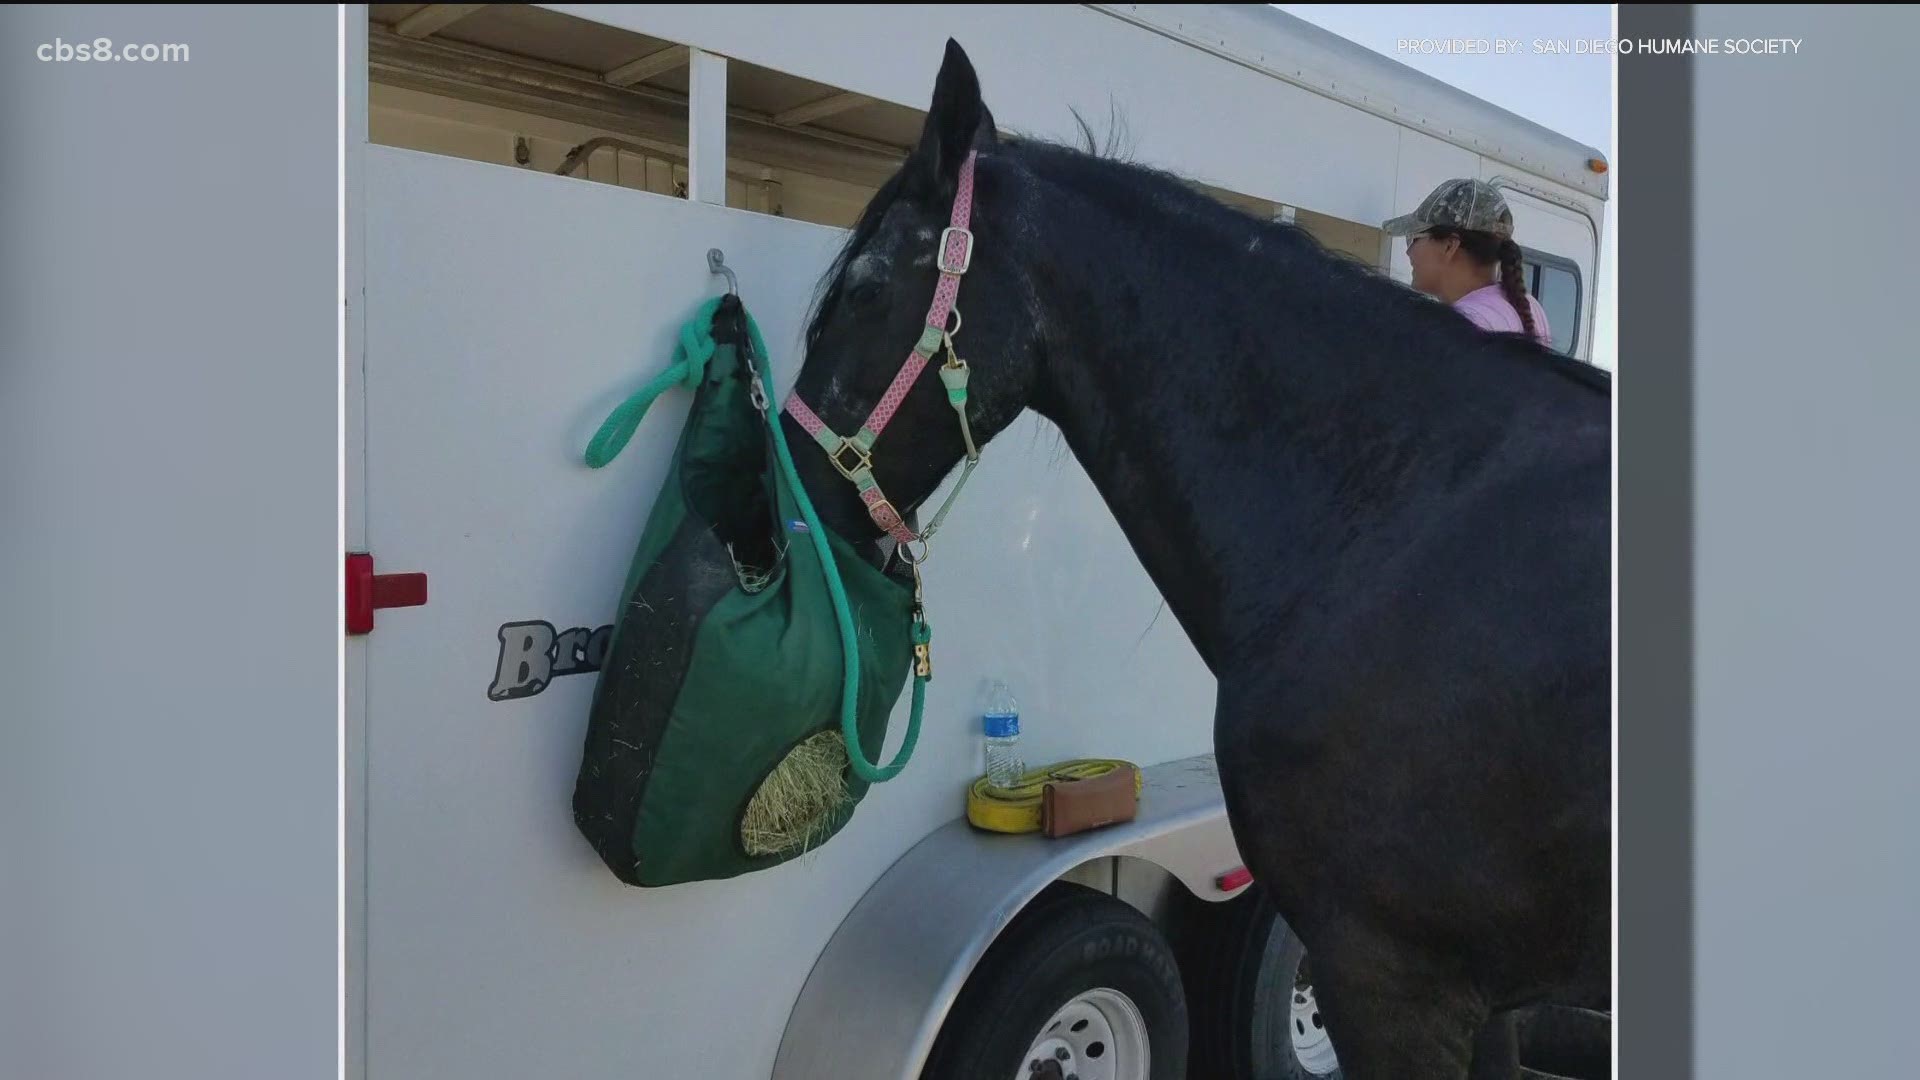 On Saturday, the humane society said the horse named Raven was feeling much better and shared video from the animal's owner on Twitter.